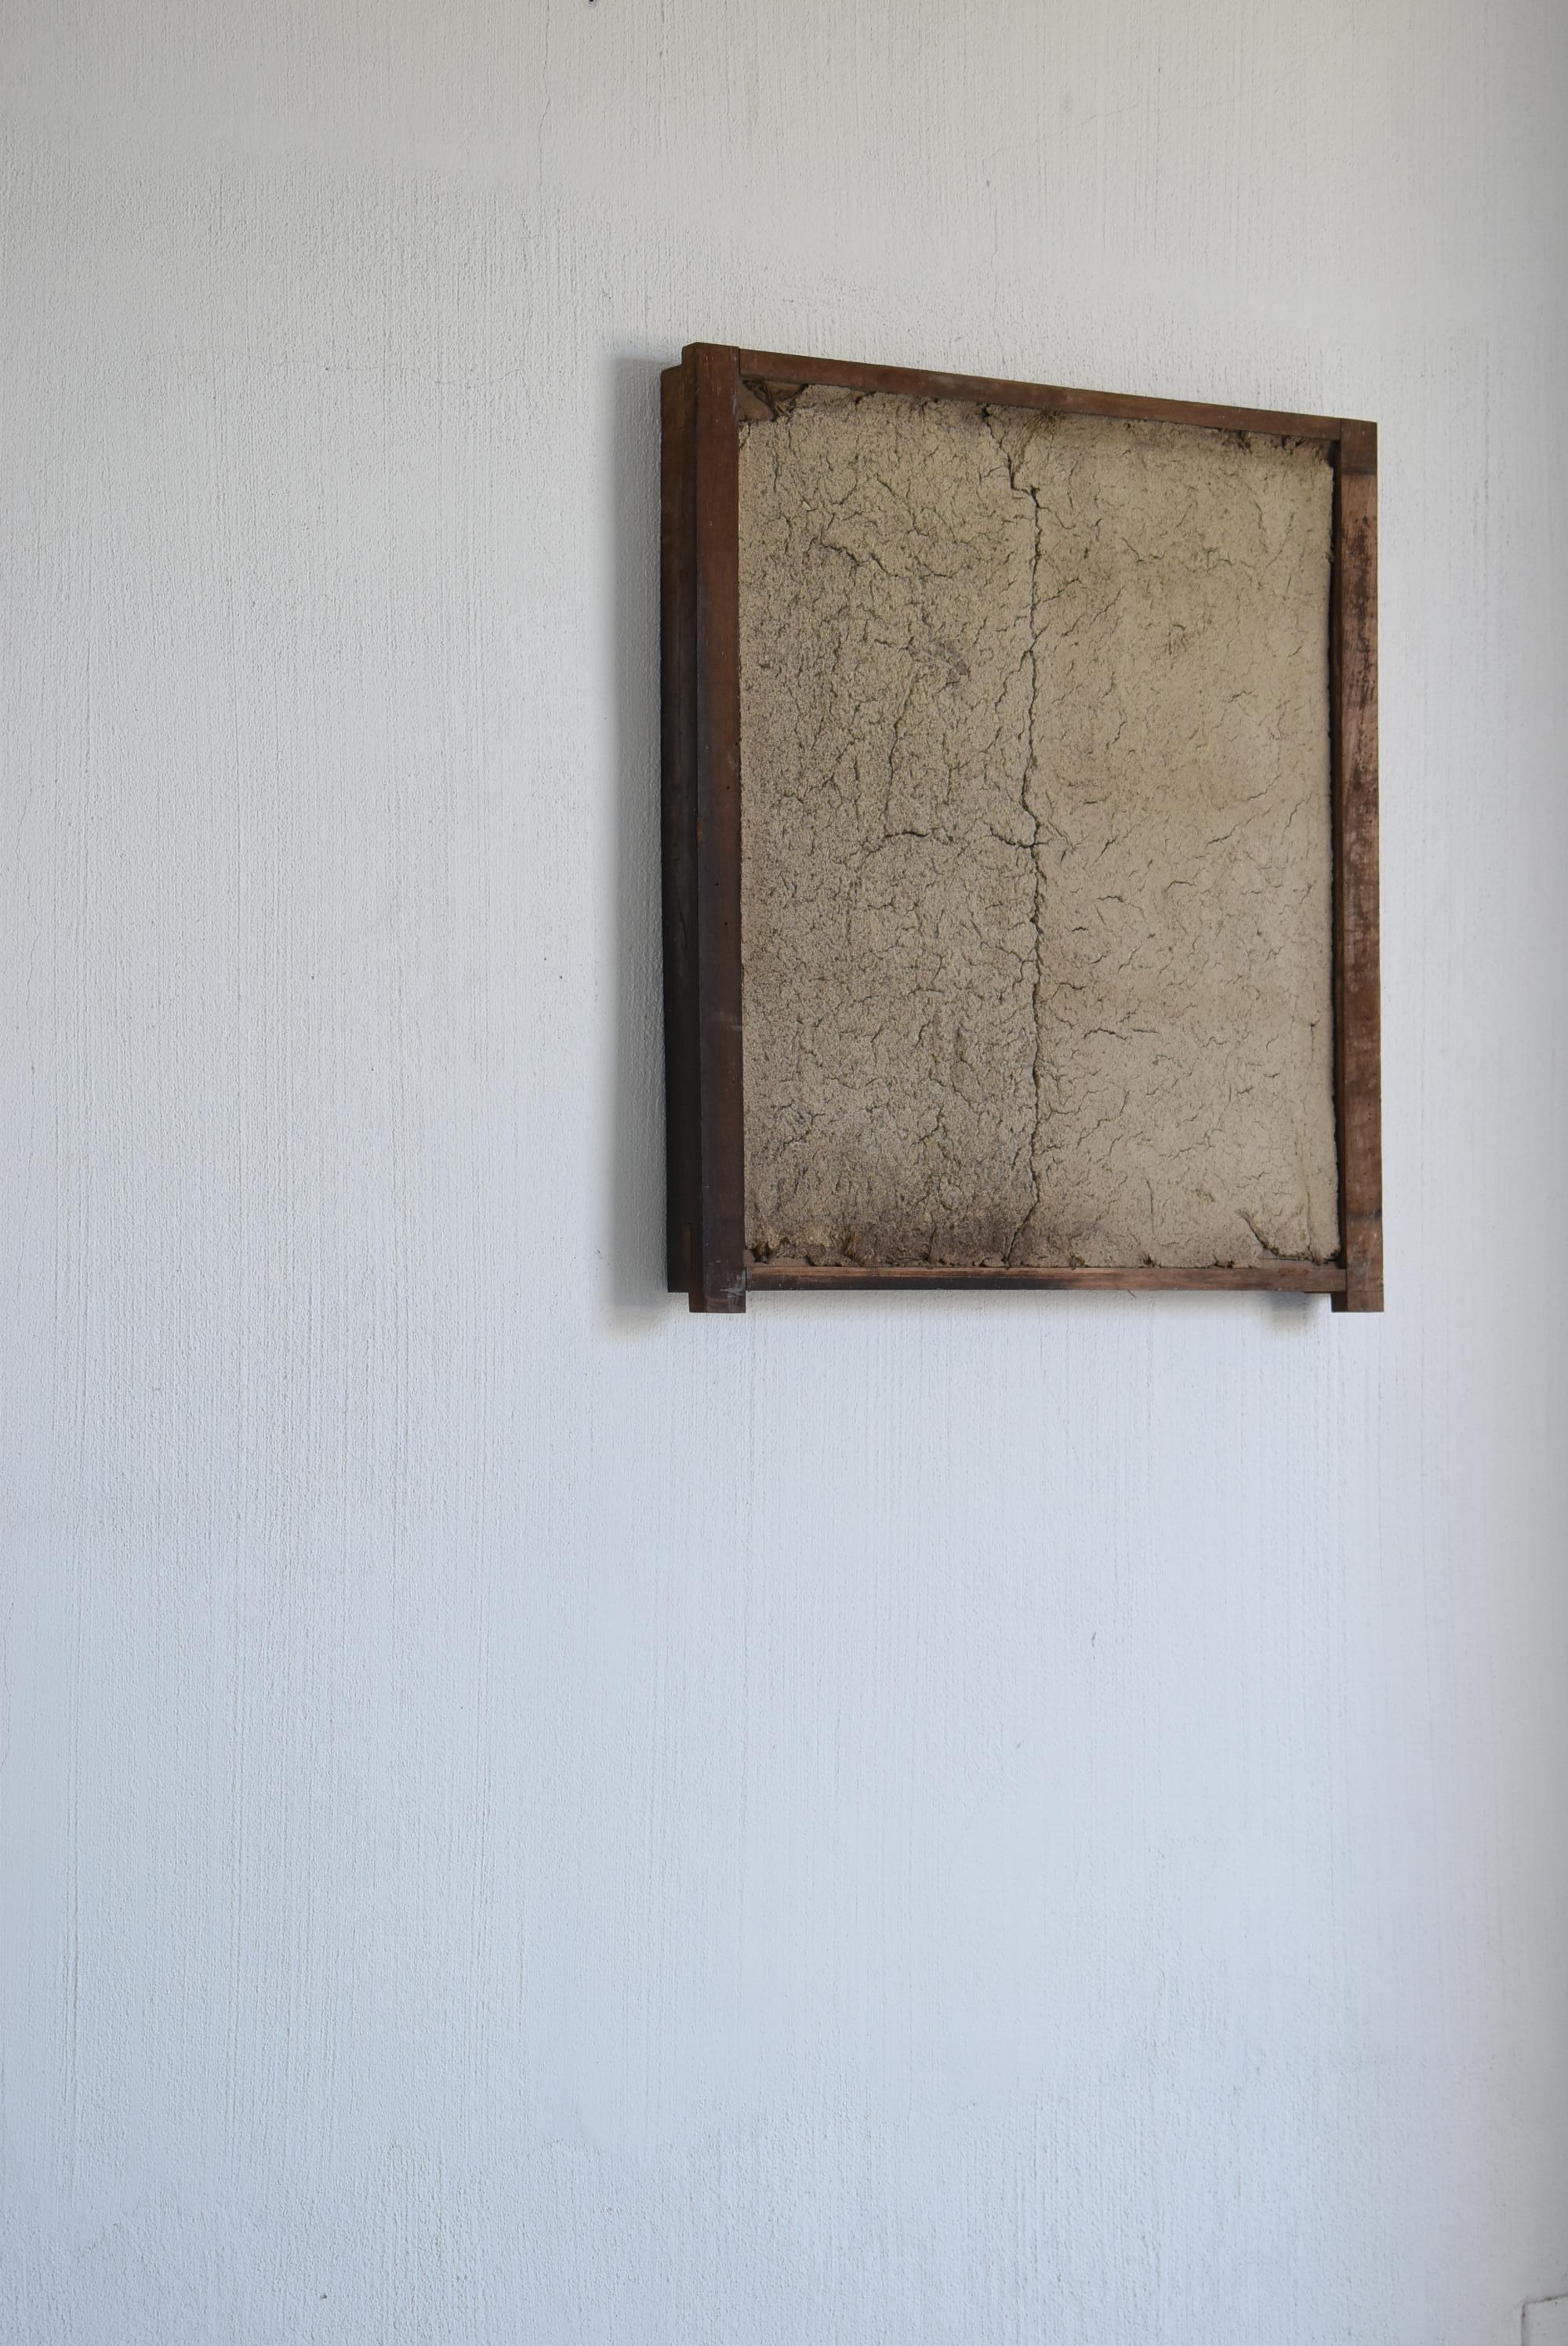 It is the door of a warehouse (KURA) in the Edo period in Japan.
Made of plaster.
This item is from the late Edo period. (1750s-1860s)

It is unusual for it to remain in this state.

Please hang it on the wall and enjoy it as an